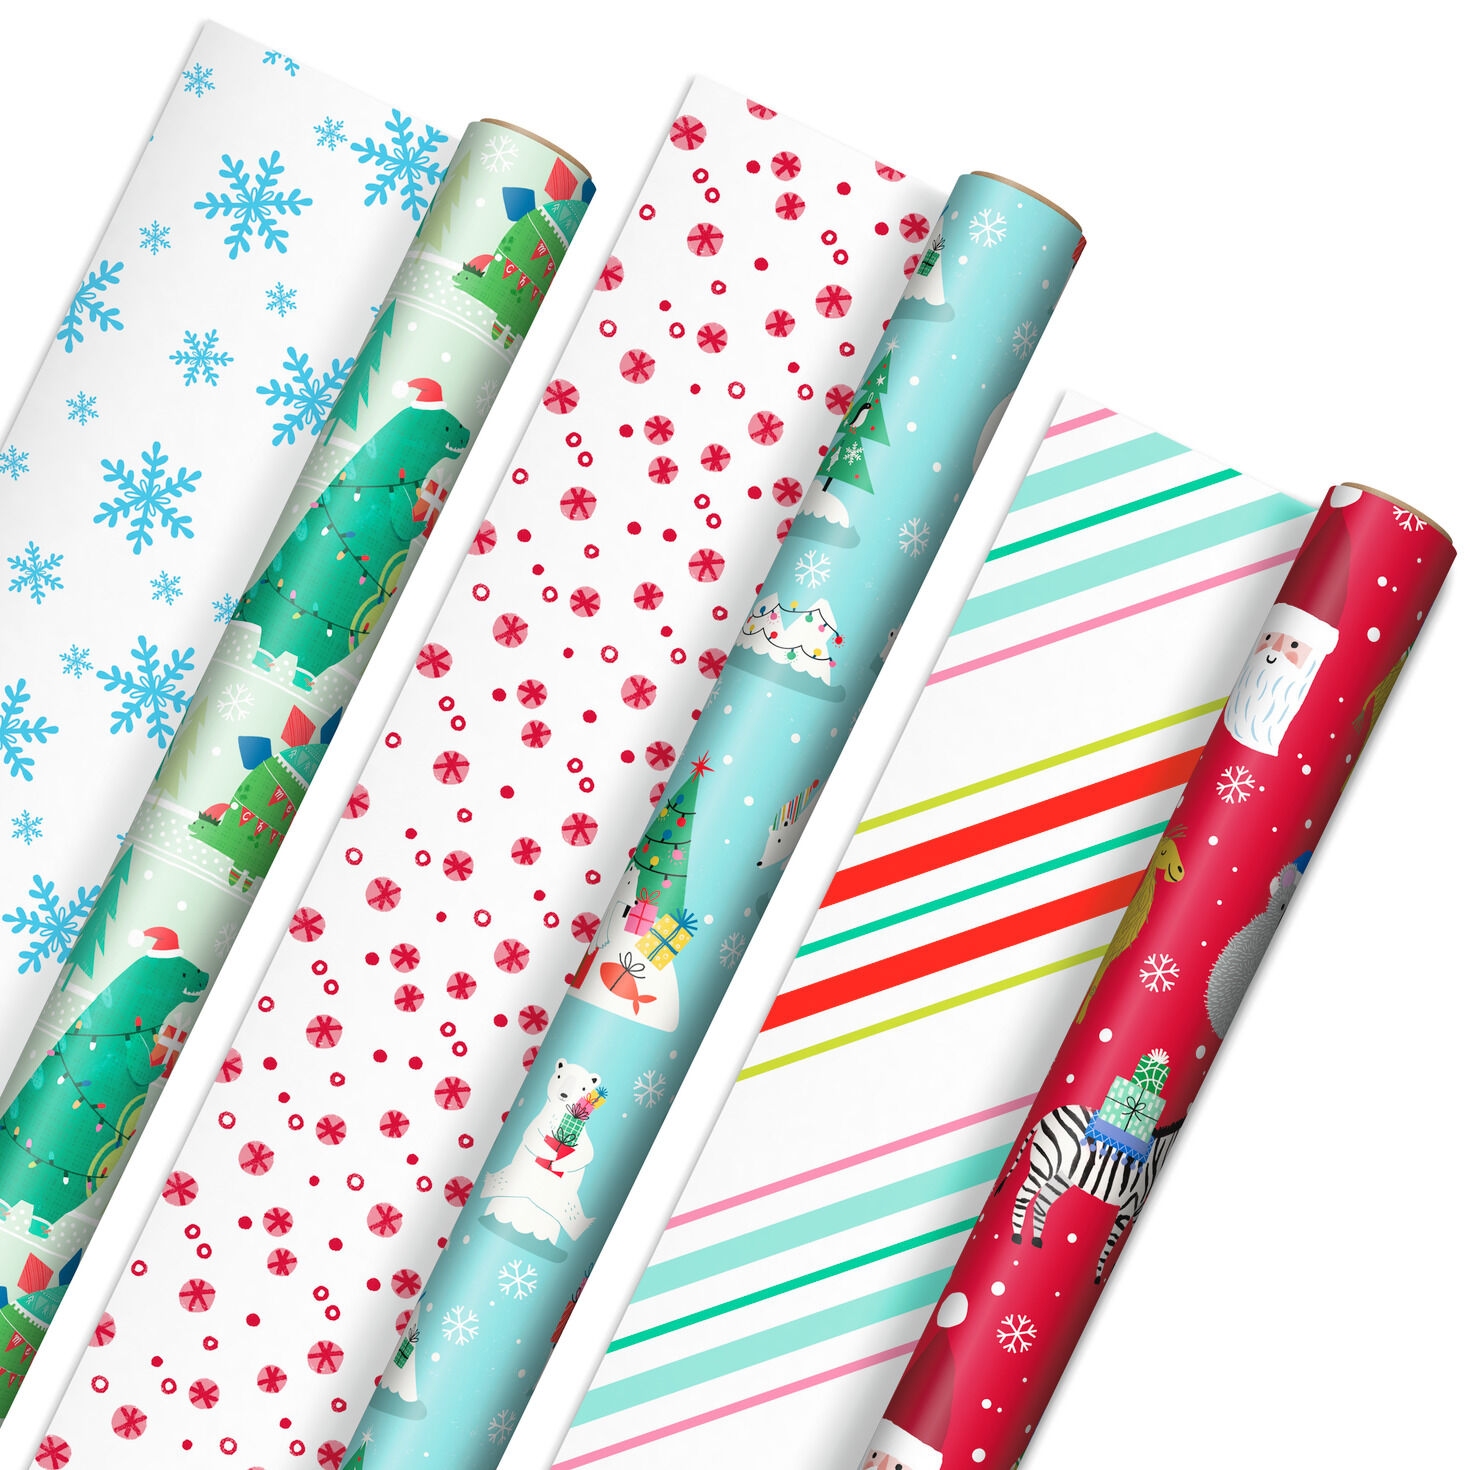 Winter Friends 3-Pack Reversible Kids Christmas Wrapping Paper Assortment, 120 sq. ft. for only USD 16.99 | Hallmark